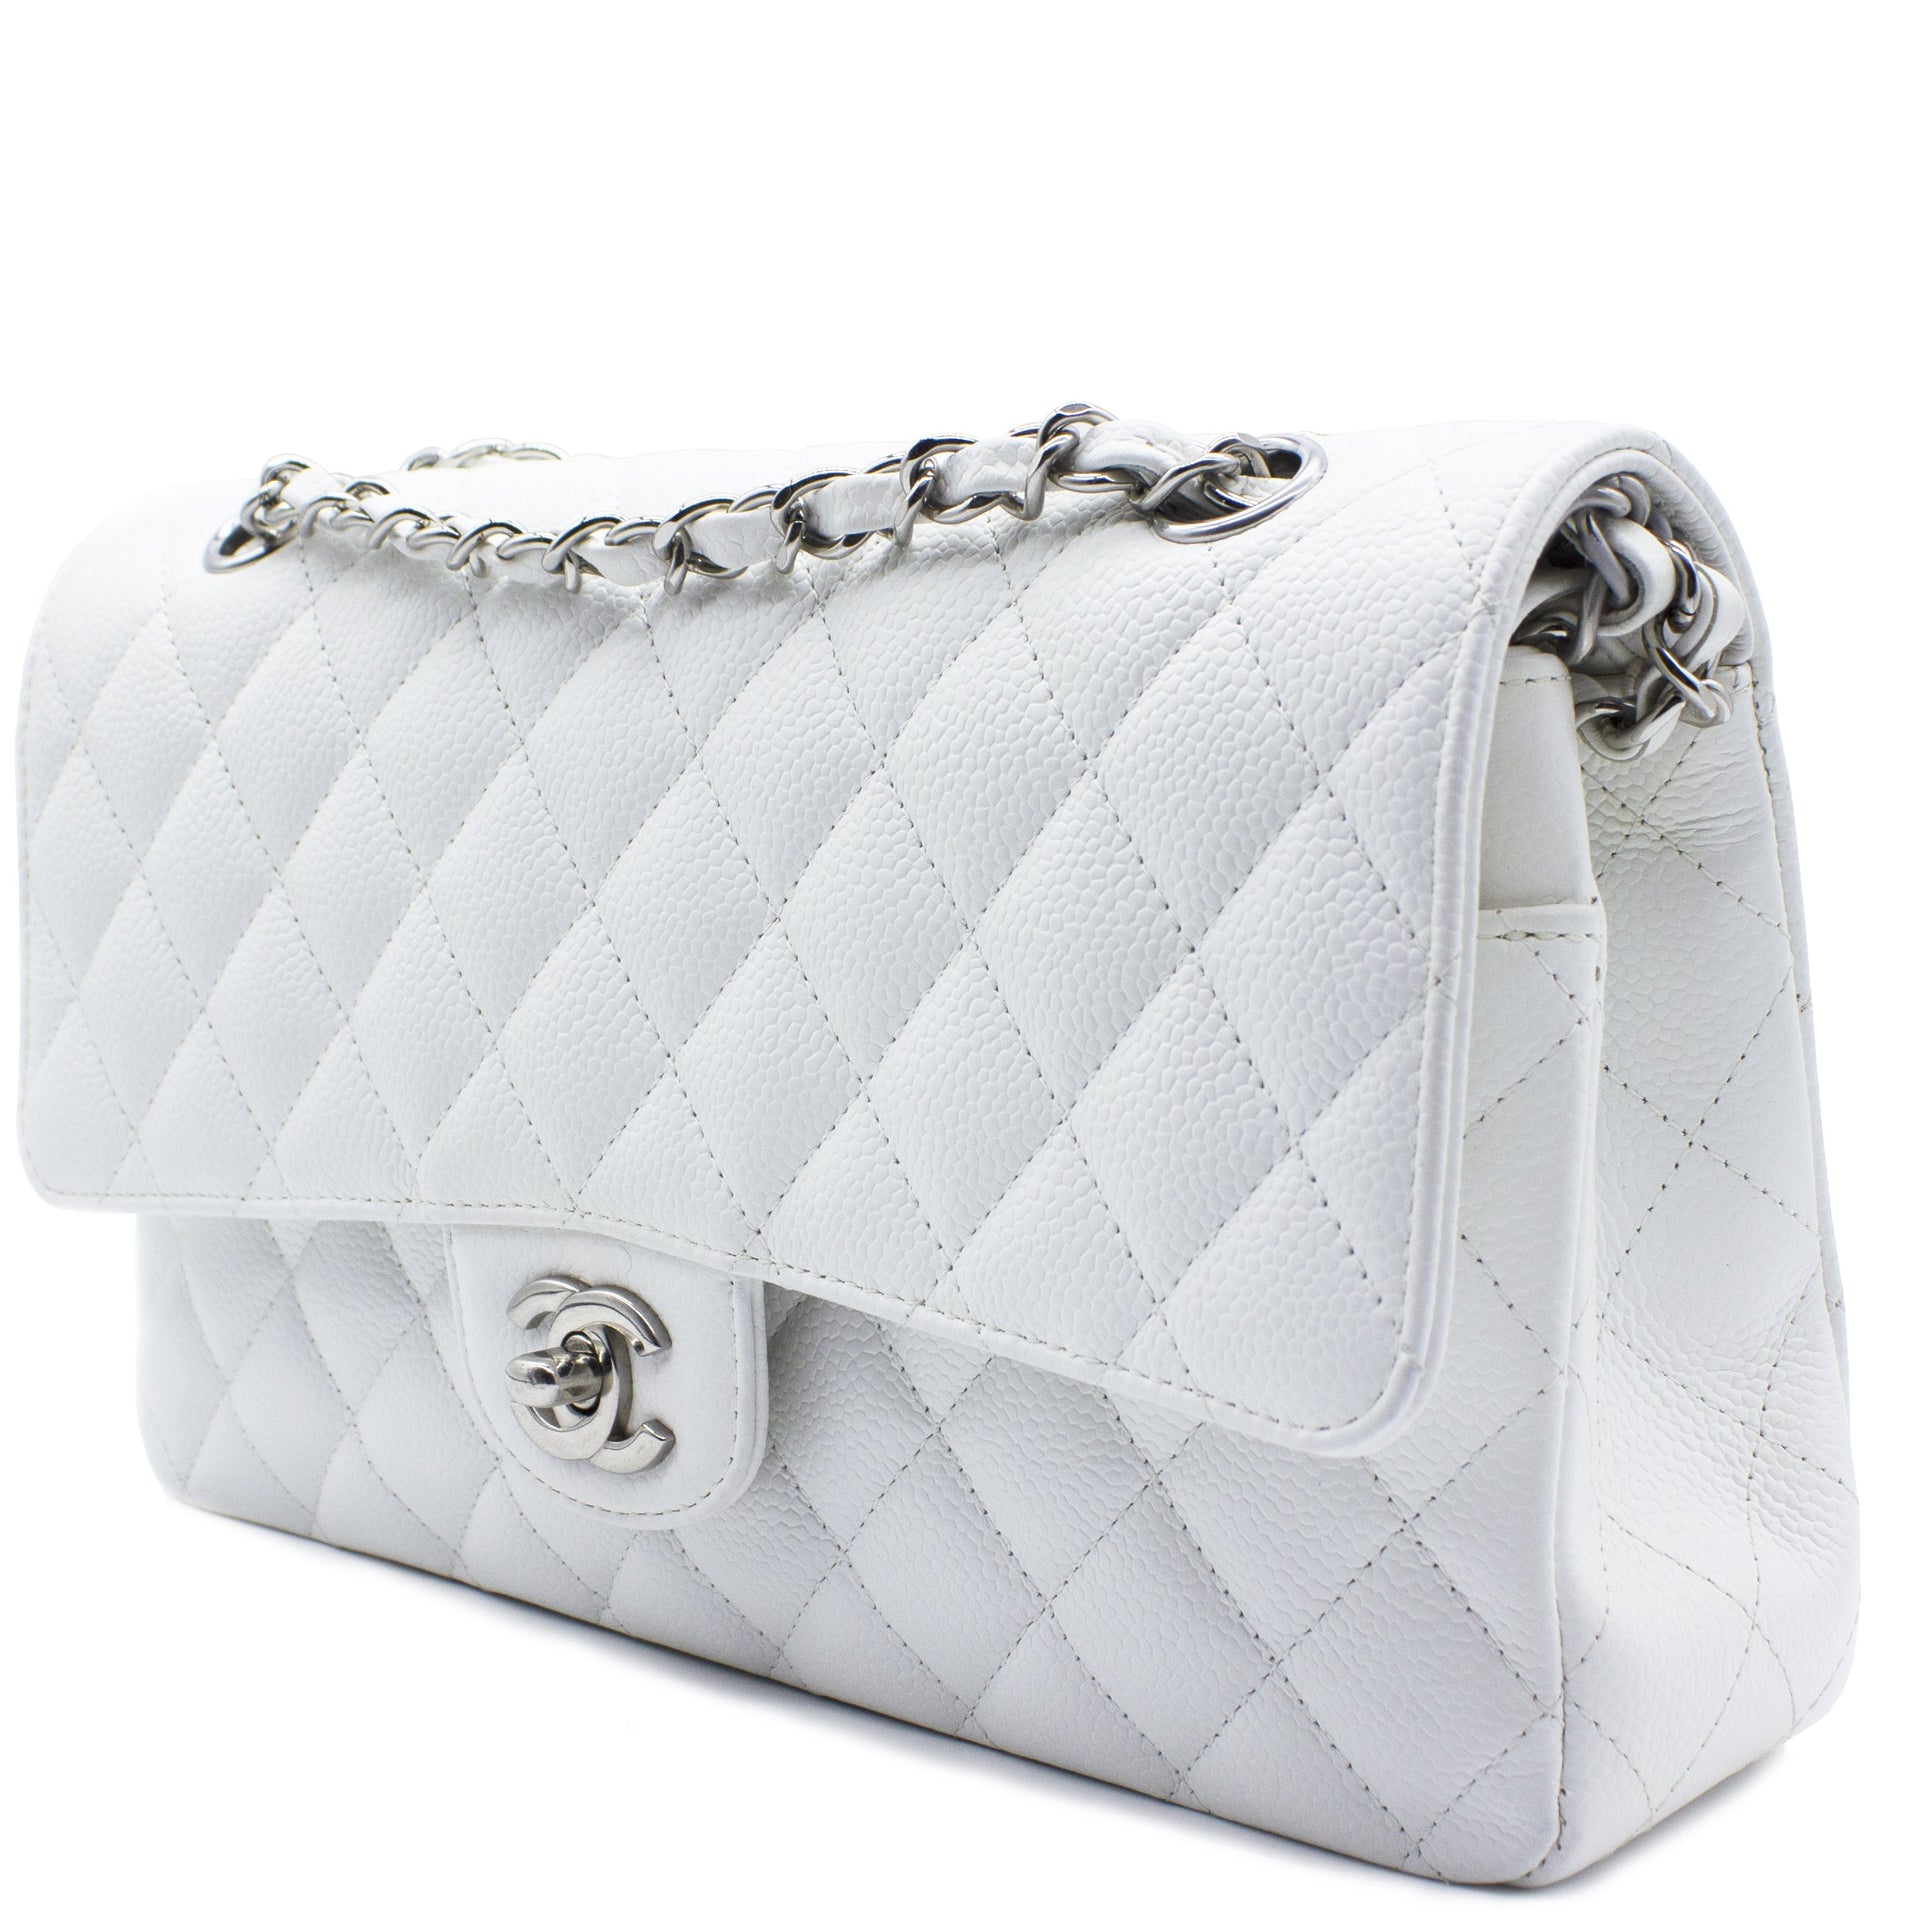 White Quilted Caviar Leather Classic Double Flap Bag